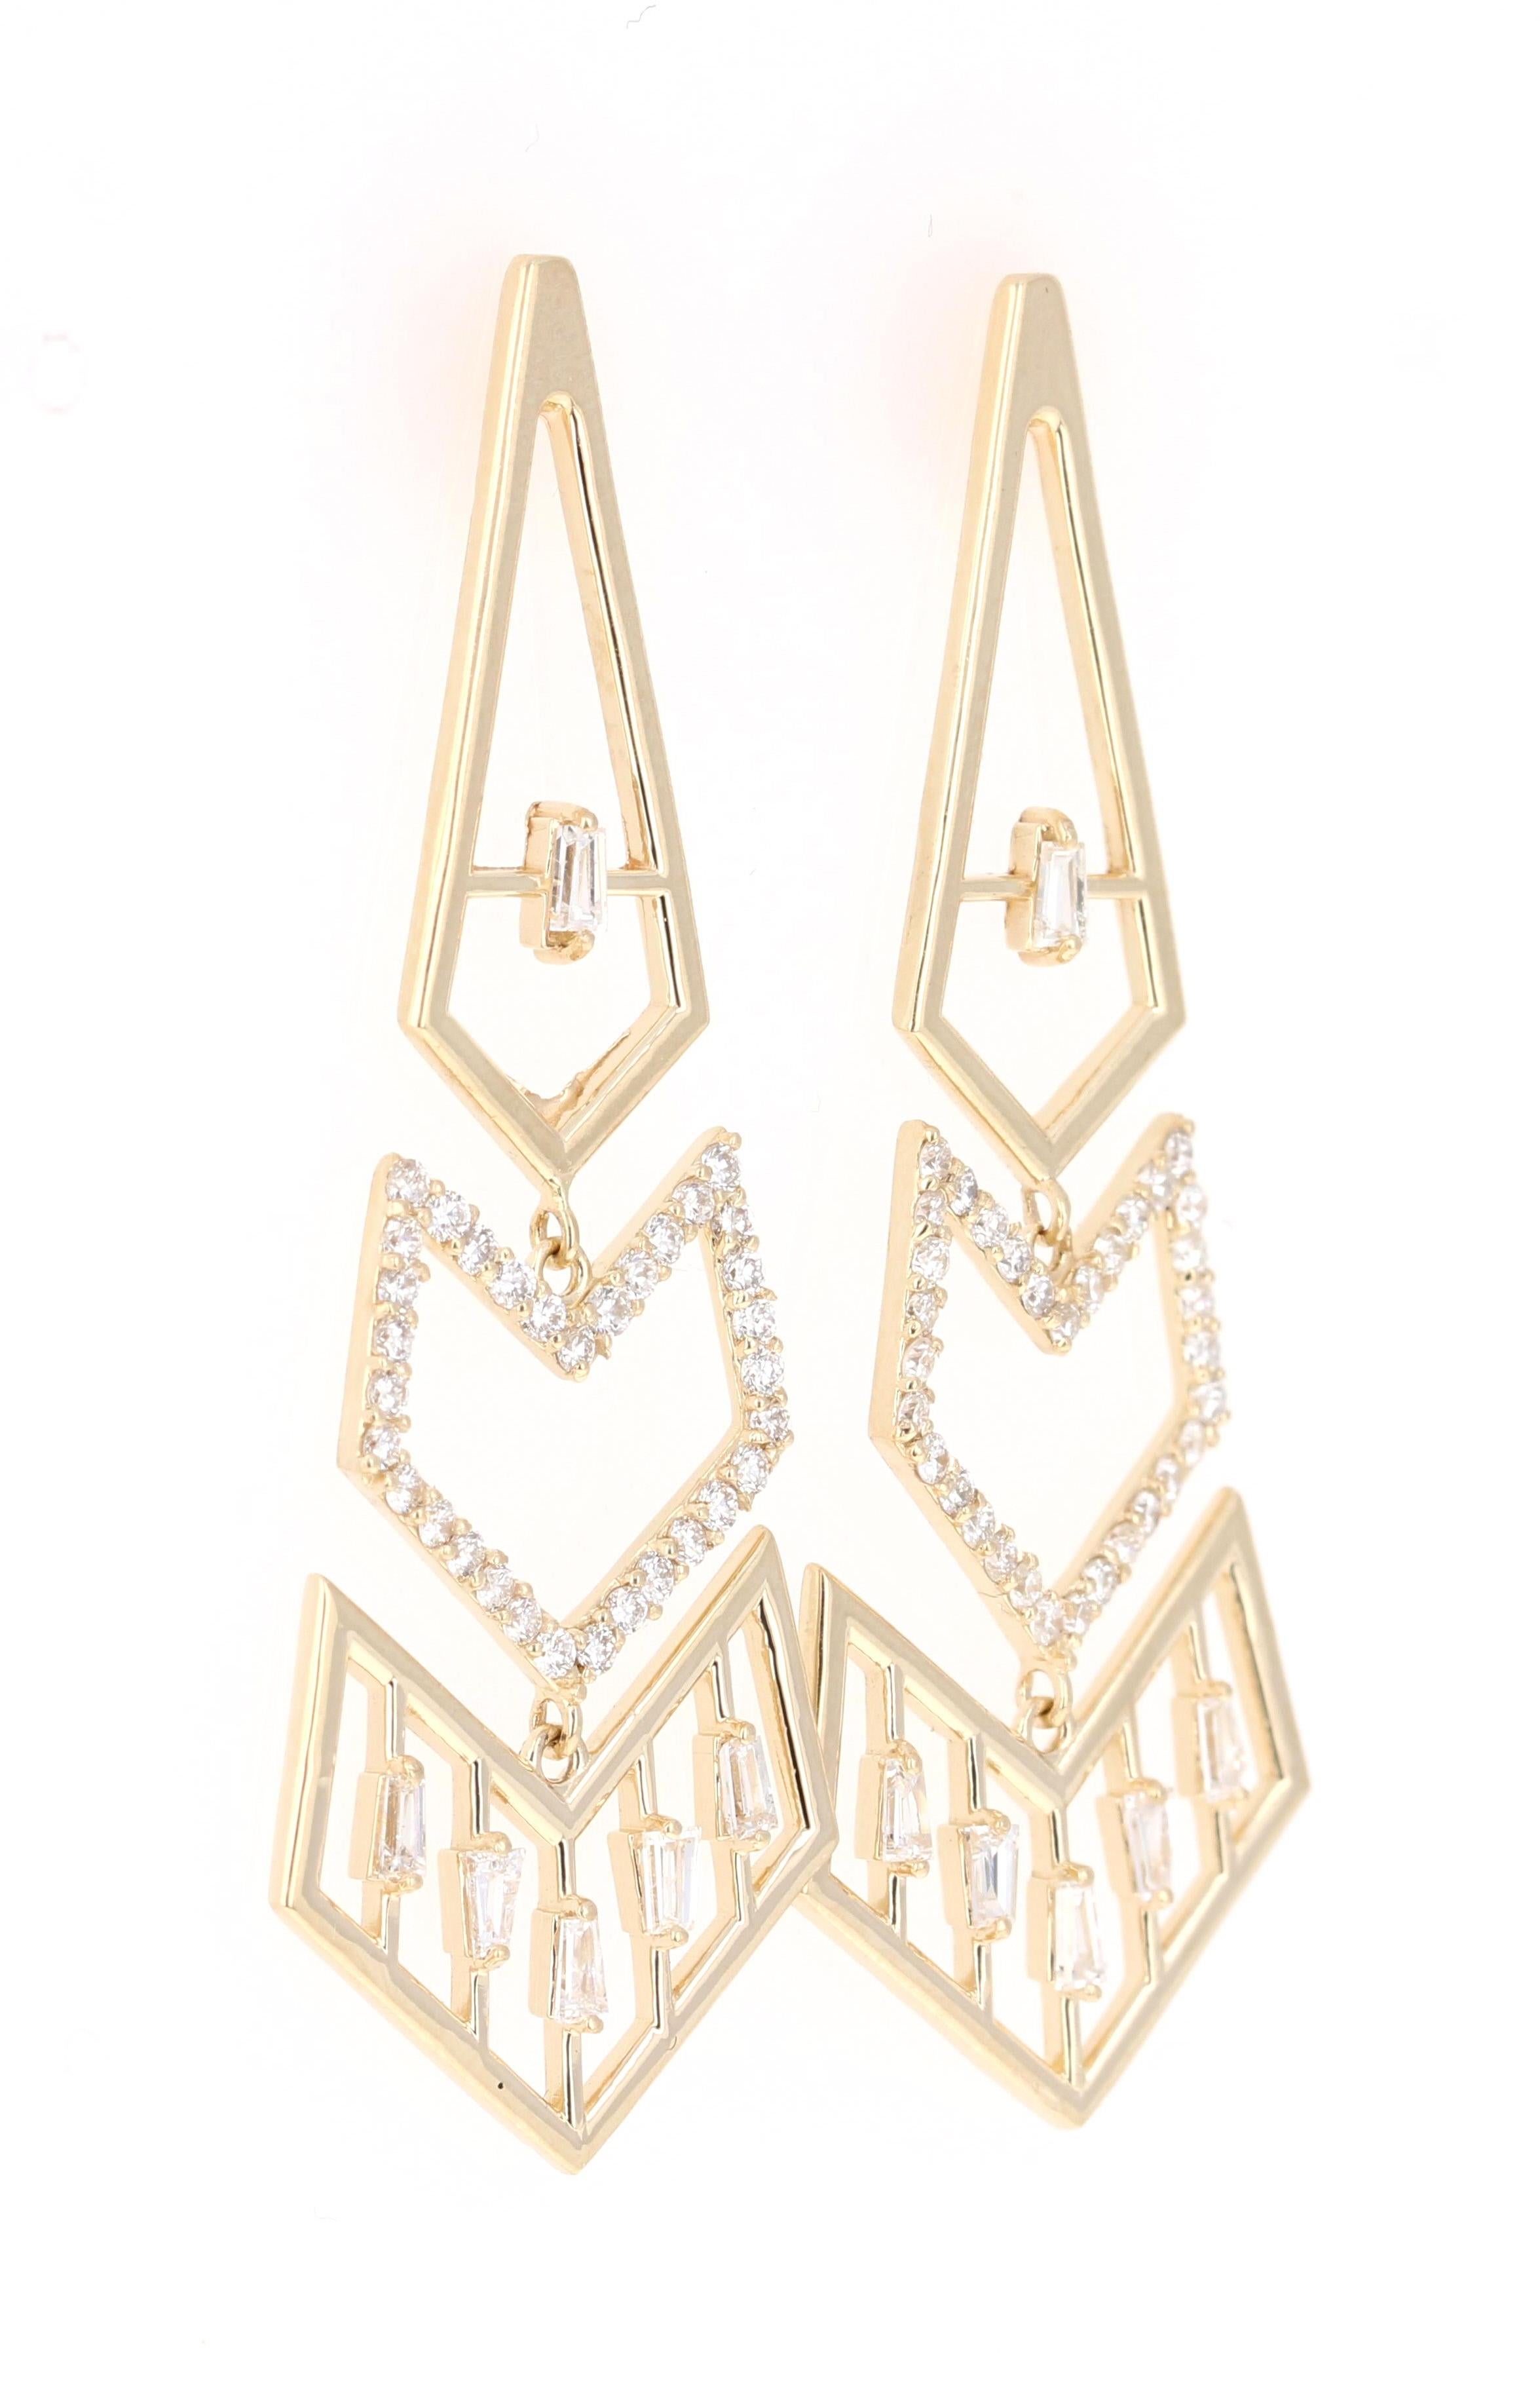 
These delicate, yet intricate design earrings are sure to compliment everyone's wardrobe! These Earrings are inspired by the Art-Deco Era. 

The Earrings have 12 Baguette Cut Diamonds that weigh 0.40 Carats and 66 Round Cut Diamonds that weigh 0.52